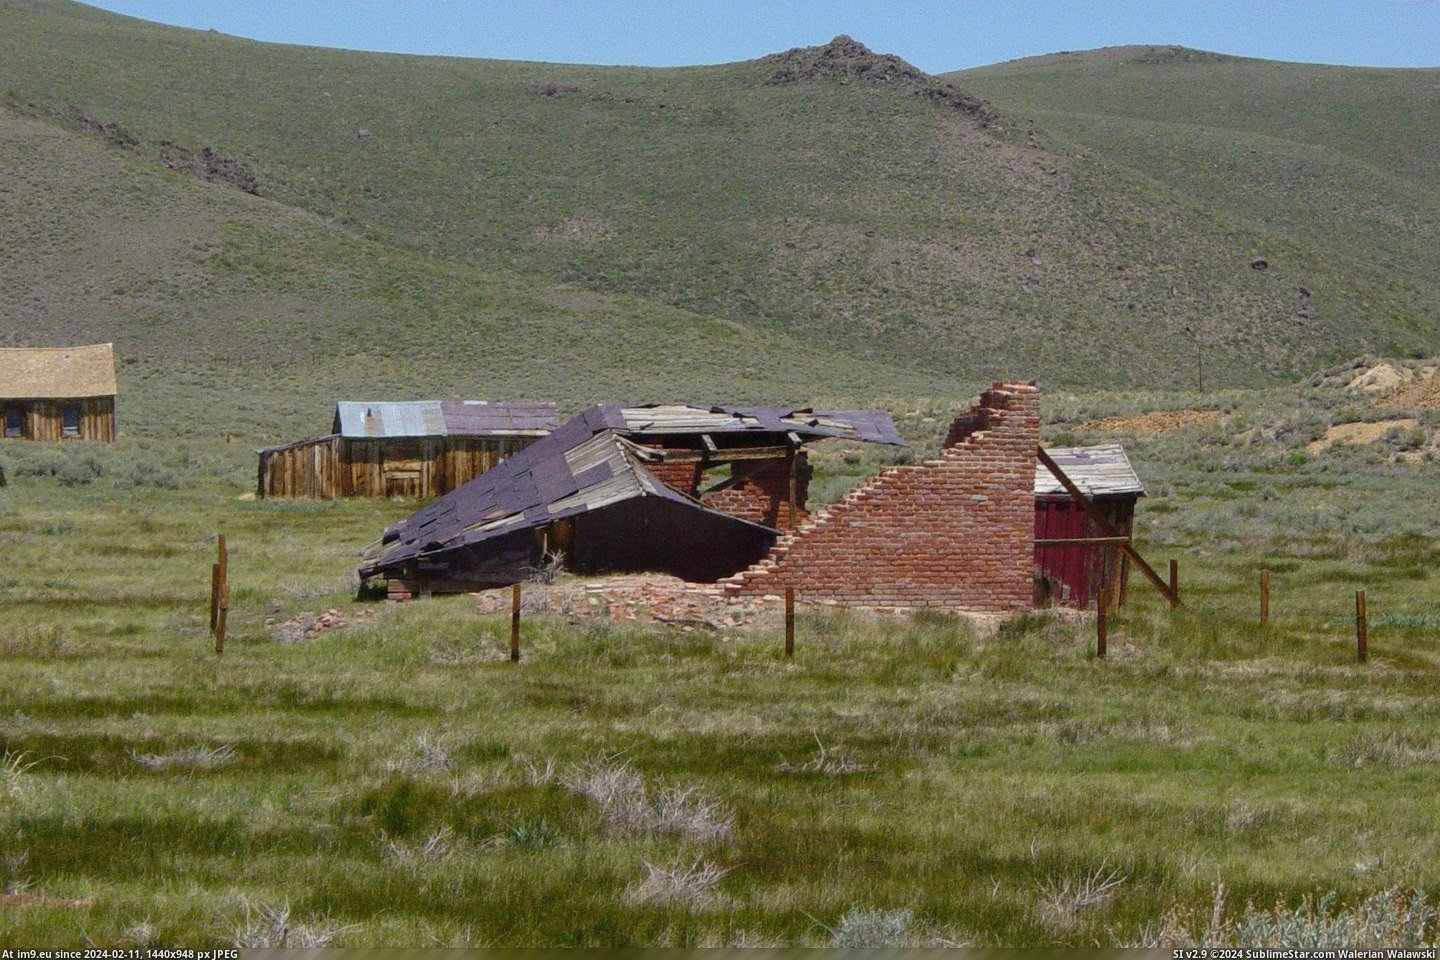 #California #Ruins #Warehouse #Mastretti #Bodie #Liquor Mastretti Liquor Warehouse Ruins In Bodie, California Pic. (Image of album Bodie - a ghost town in Eastern California))